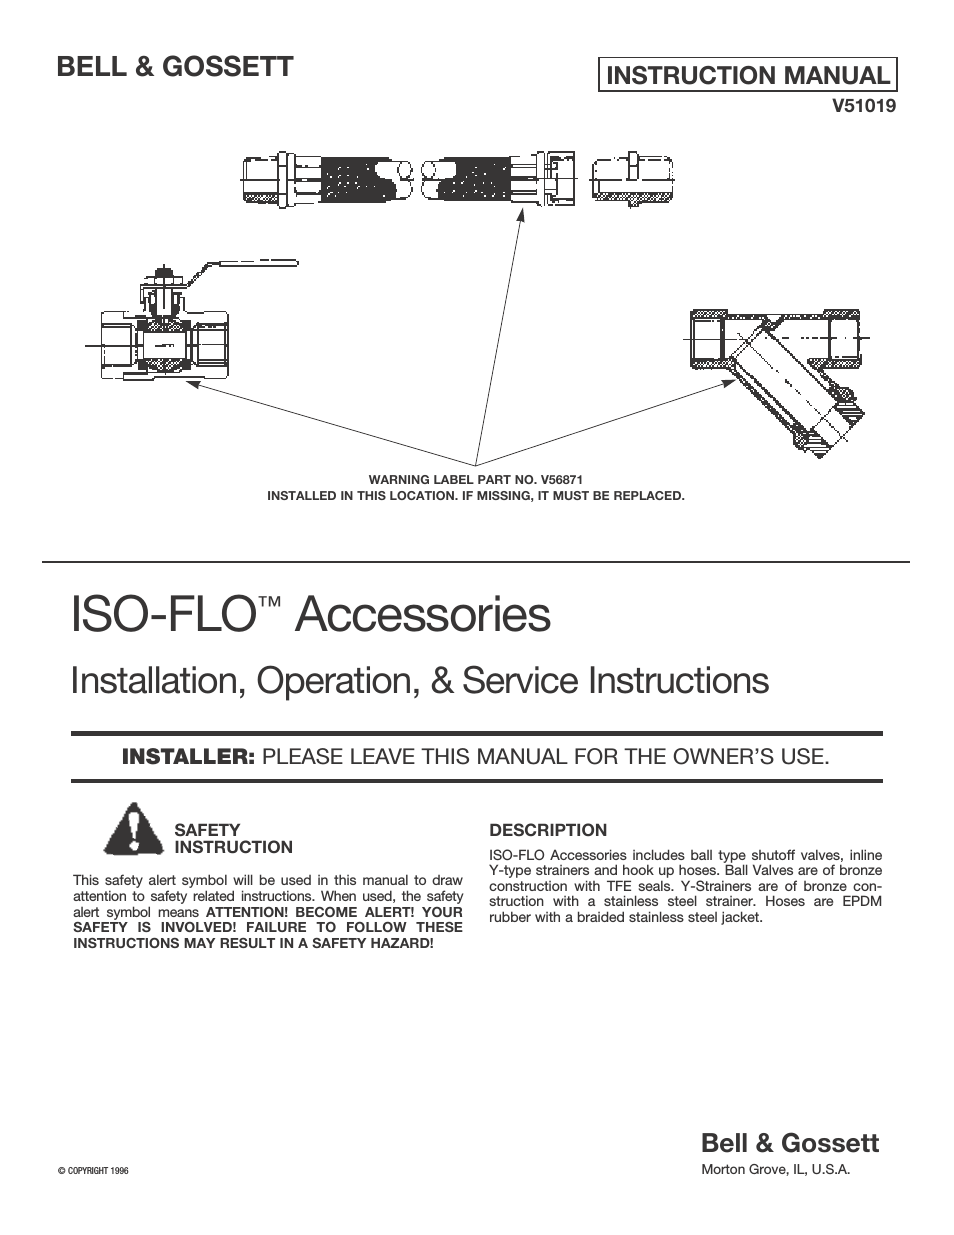 V51019 ISO-FLO Accessories